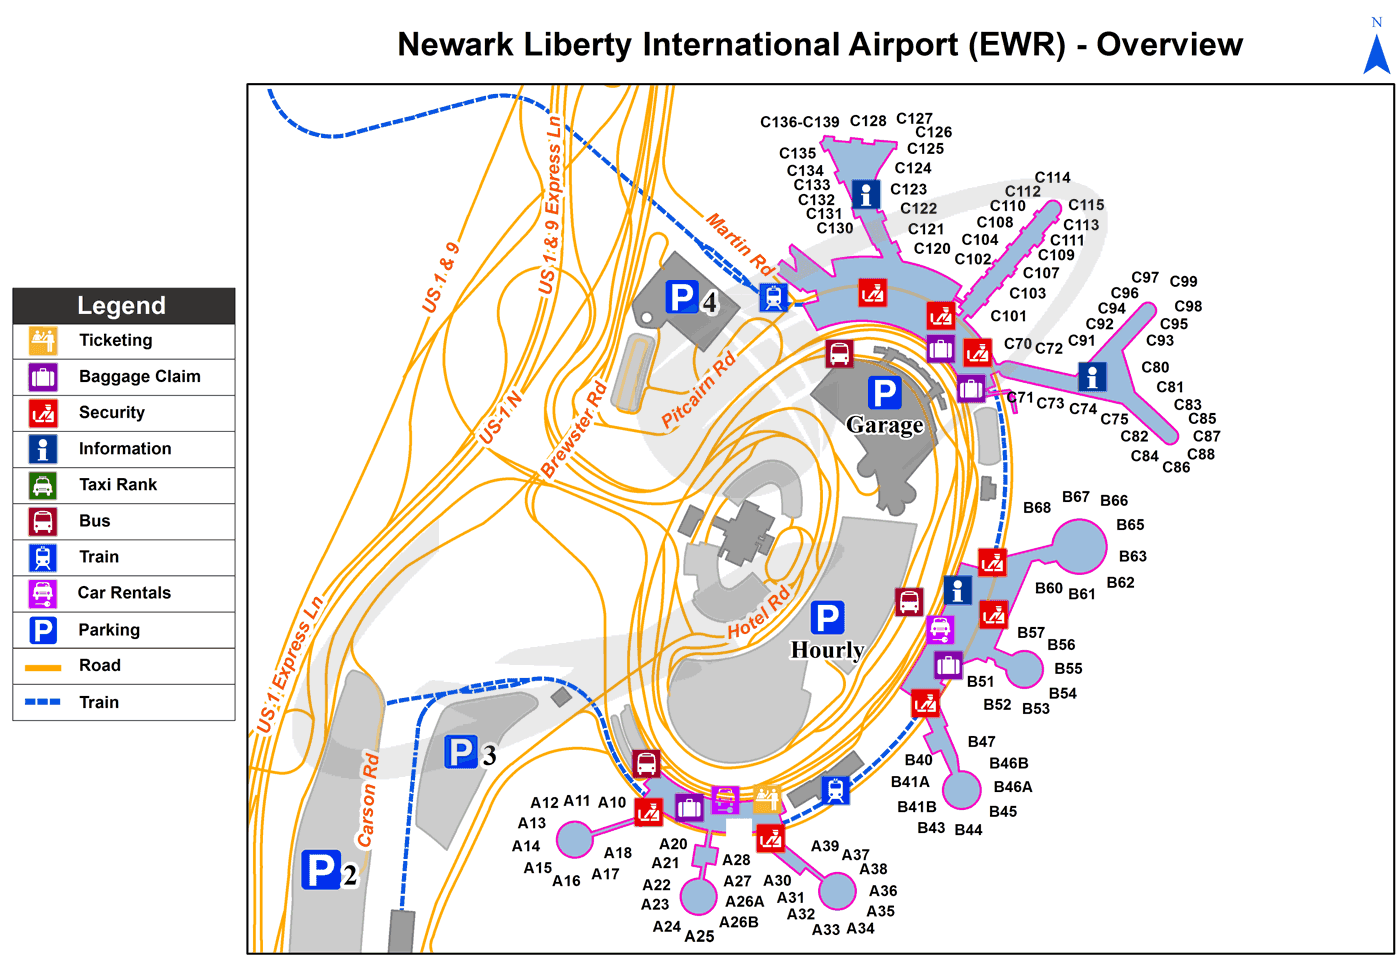 EWR_overview_map